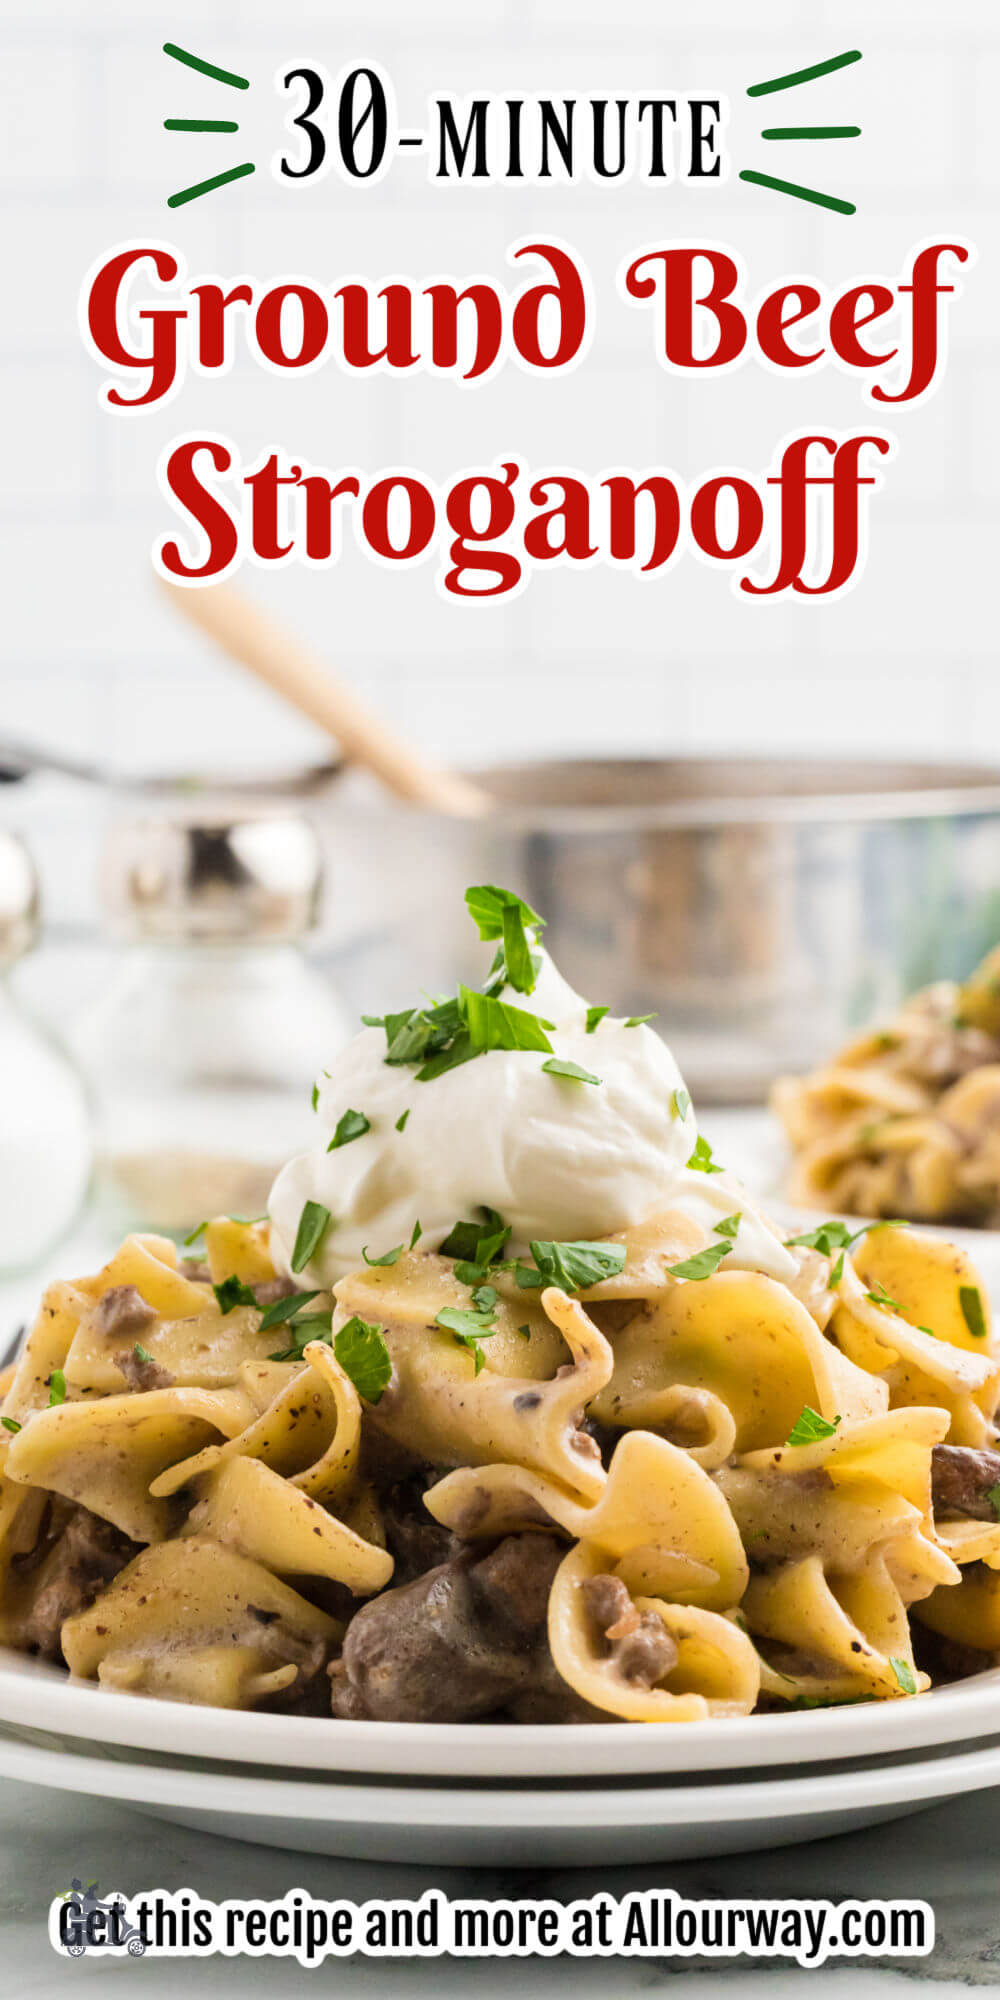 If you're in the mood for a hearty, comforting dish, look no further than ground beef stroganoff.with Mushrooms recipe. This dish is easy to make and it'll warm you up from the inside out. Plus, it's an economical meal that everyone will love.   